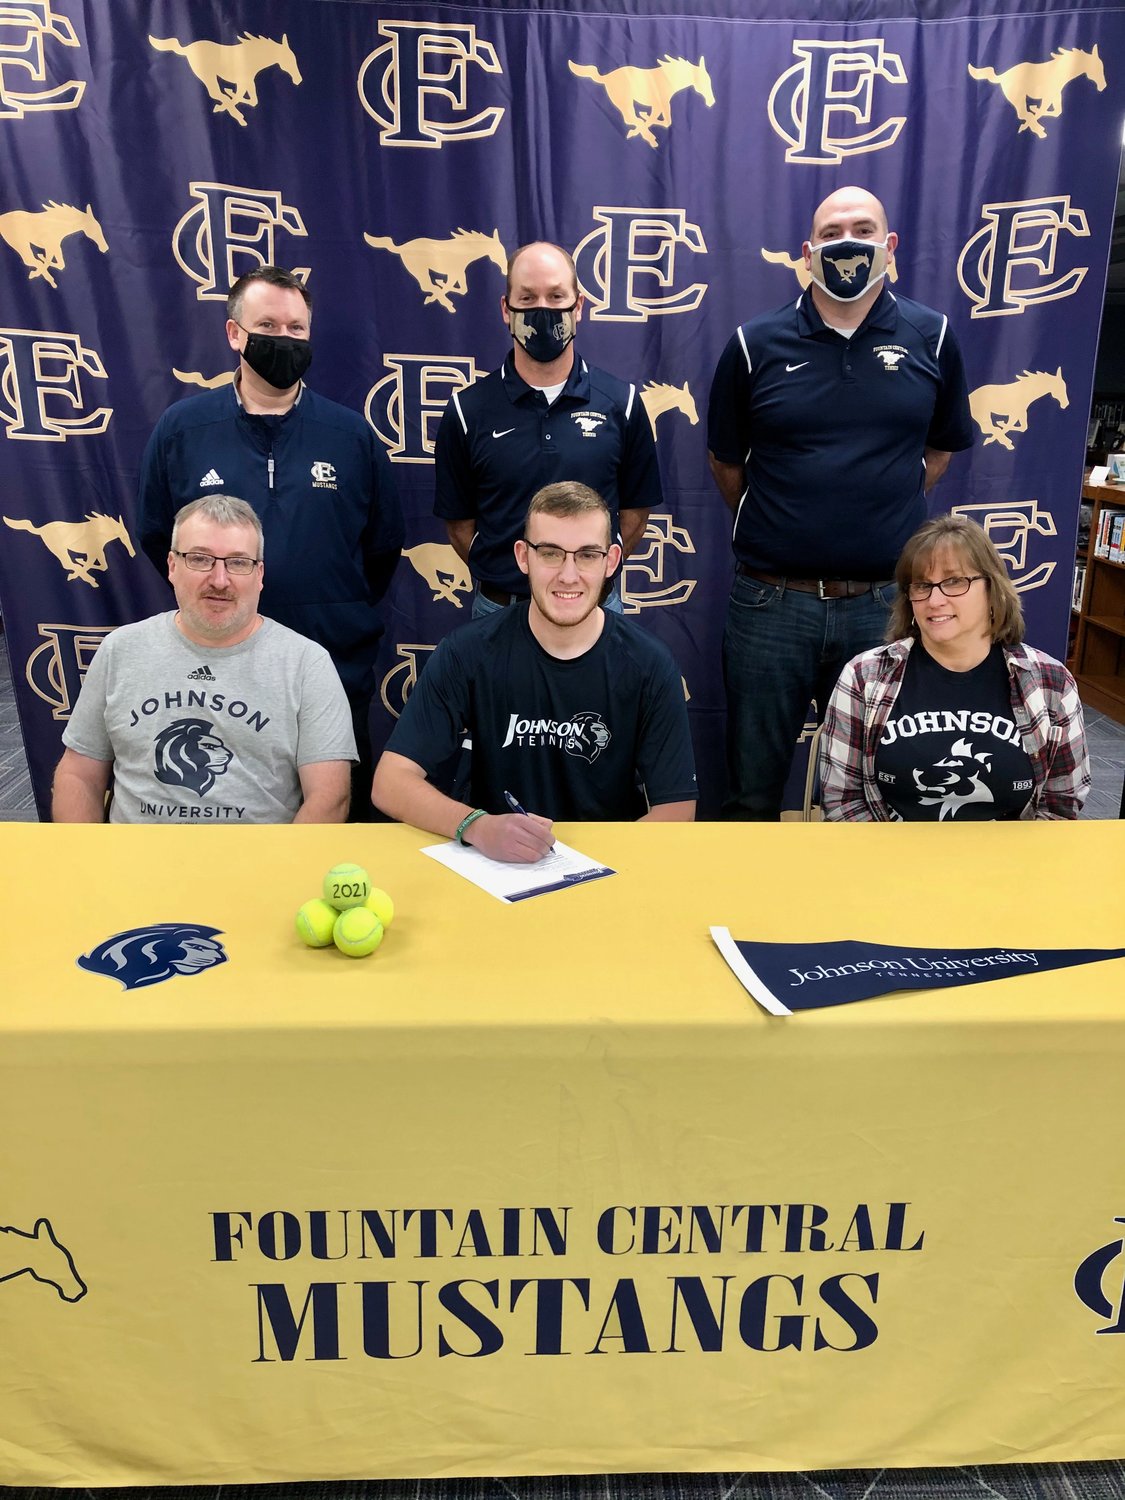 Jacob Keeling is joined by his parents BJ and Lisa Keeling to celebrate his commitmnt to play tennis at Johnson University. Also pictured is Fountain Central athletic director Jason Good and tennis coaches Chris Webb and David Kight.